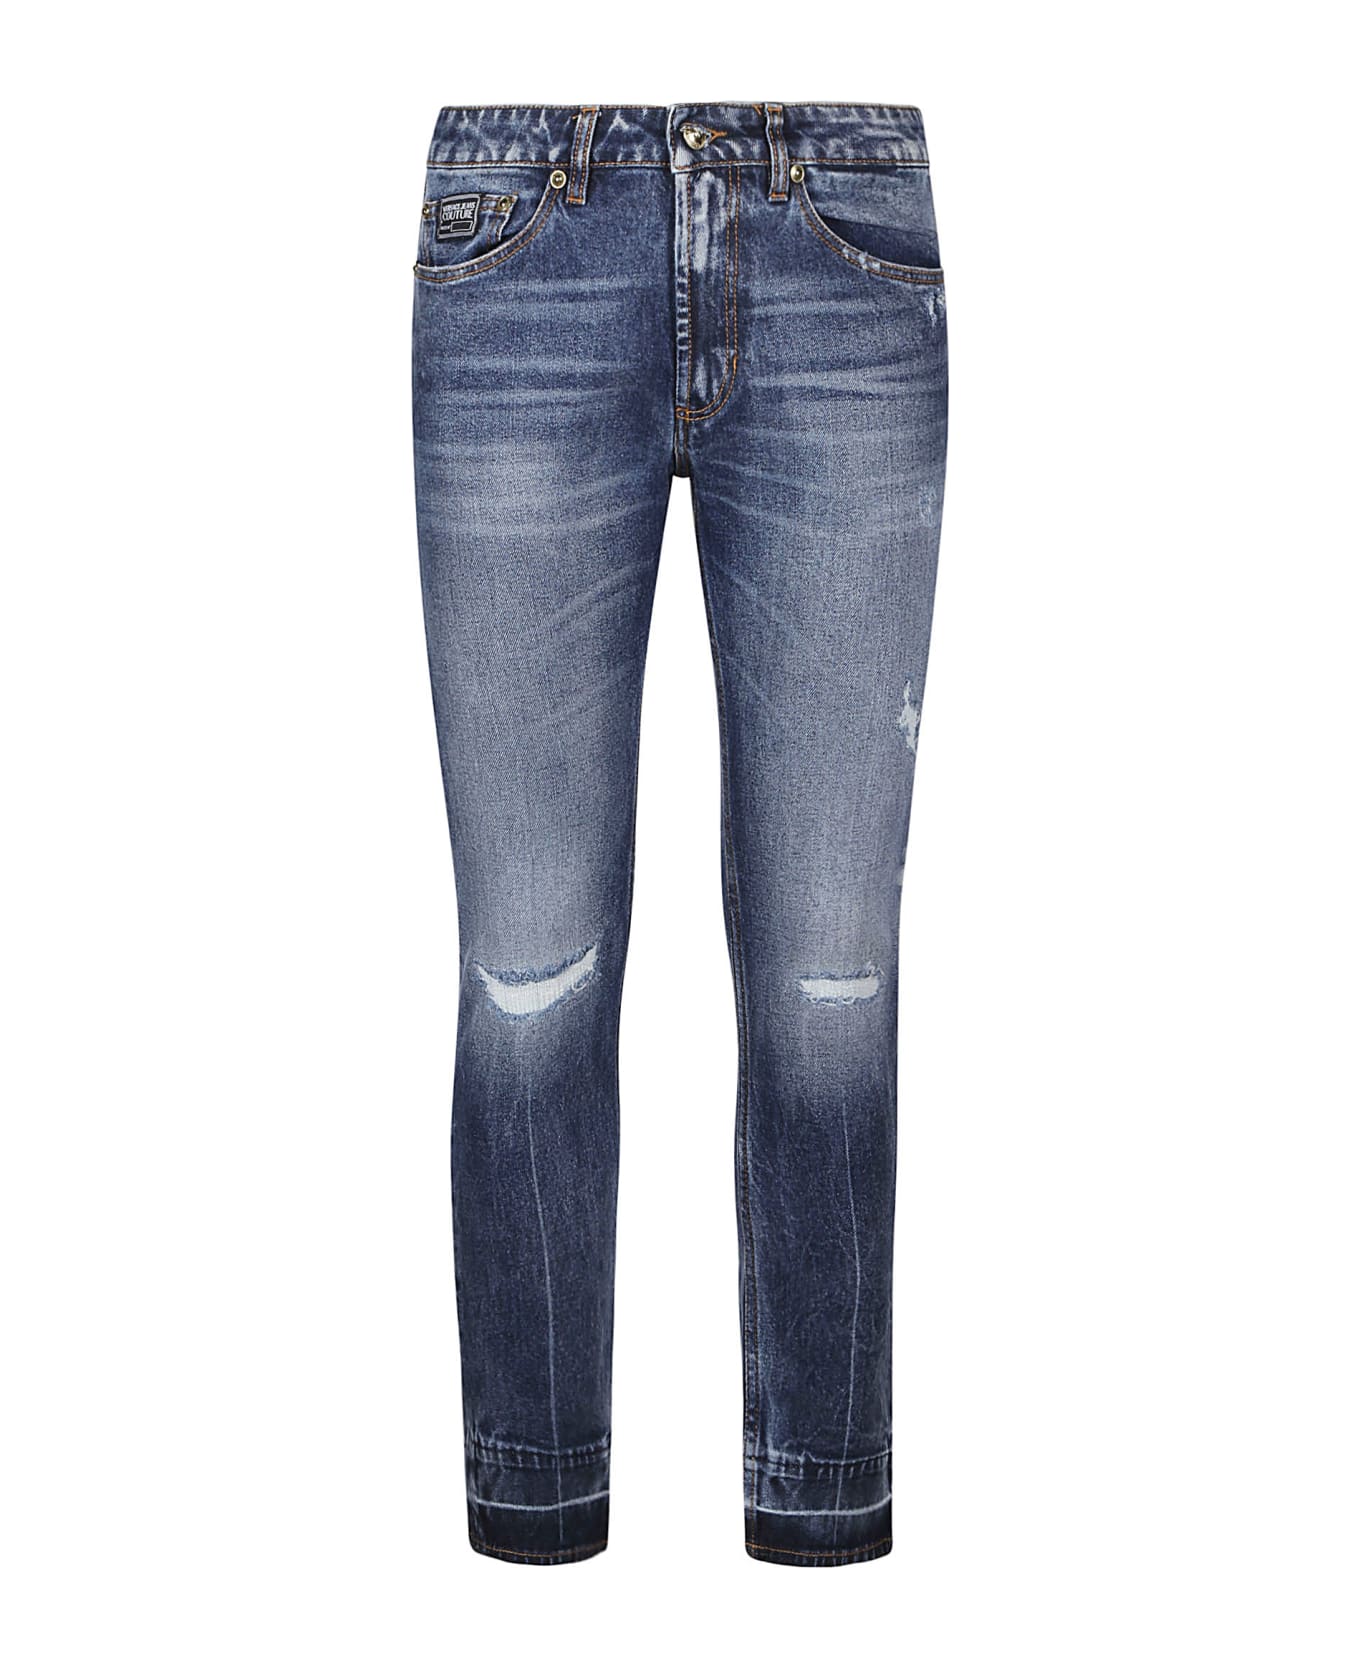 Versace Jeans Couture Rip Effect 5 Pockets Jeans - Indigo